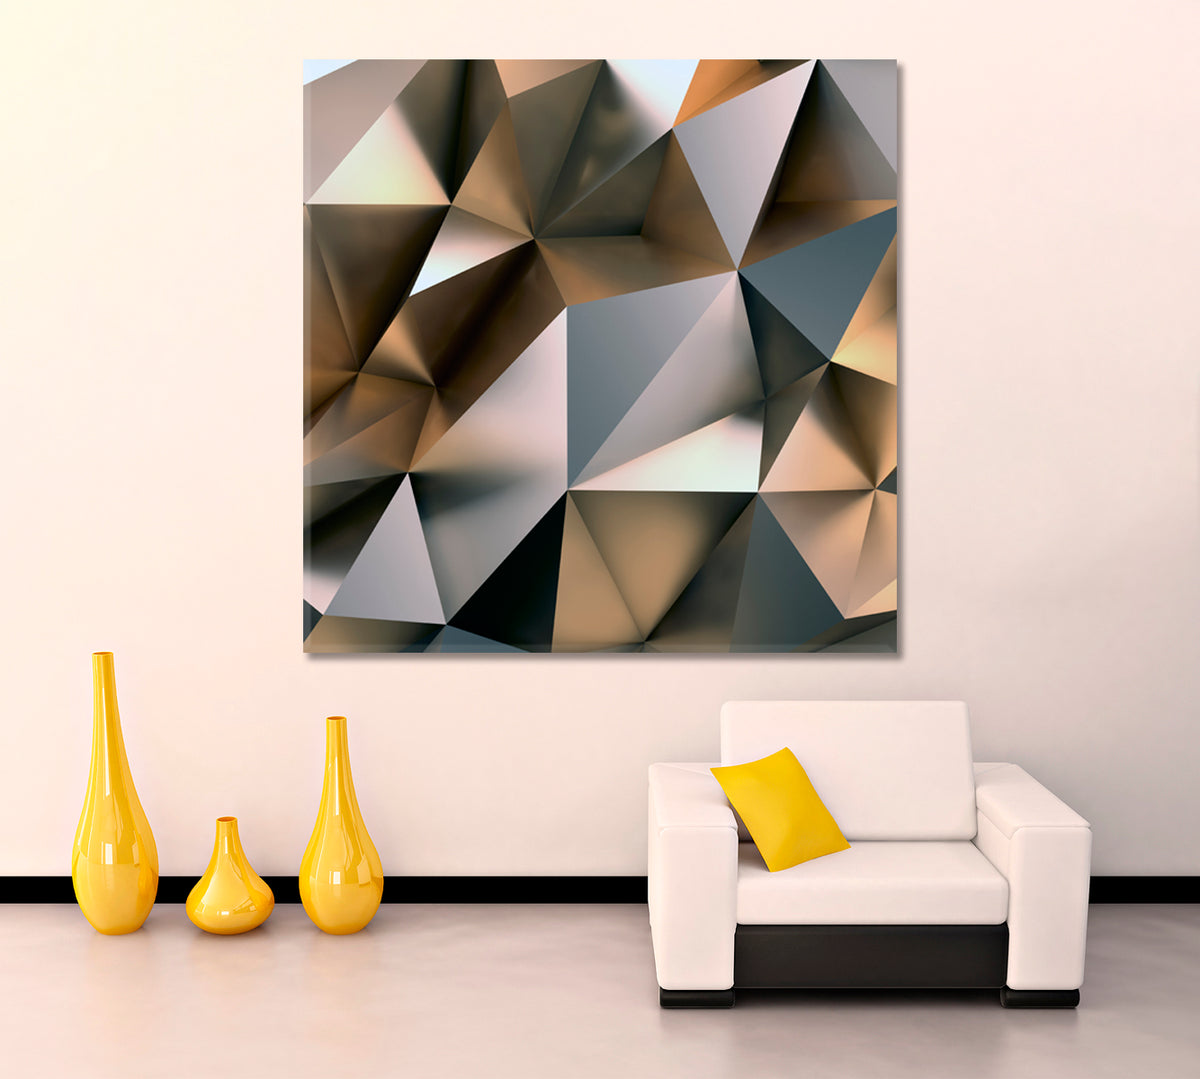 Abstract Grey 3D Pattern - Square Panel Abstract Art Print Artesty 1 Panel 12"x12" 